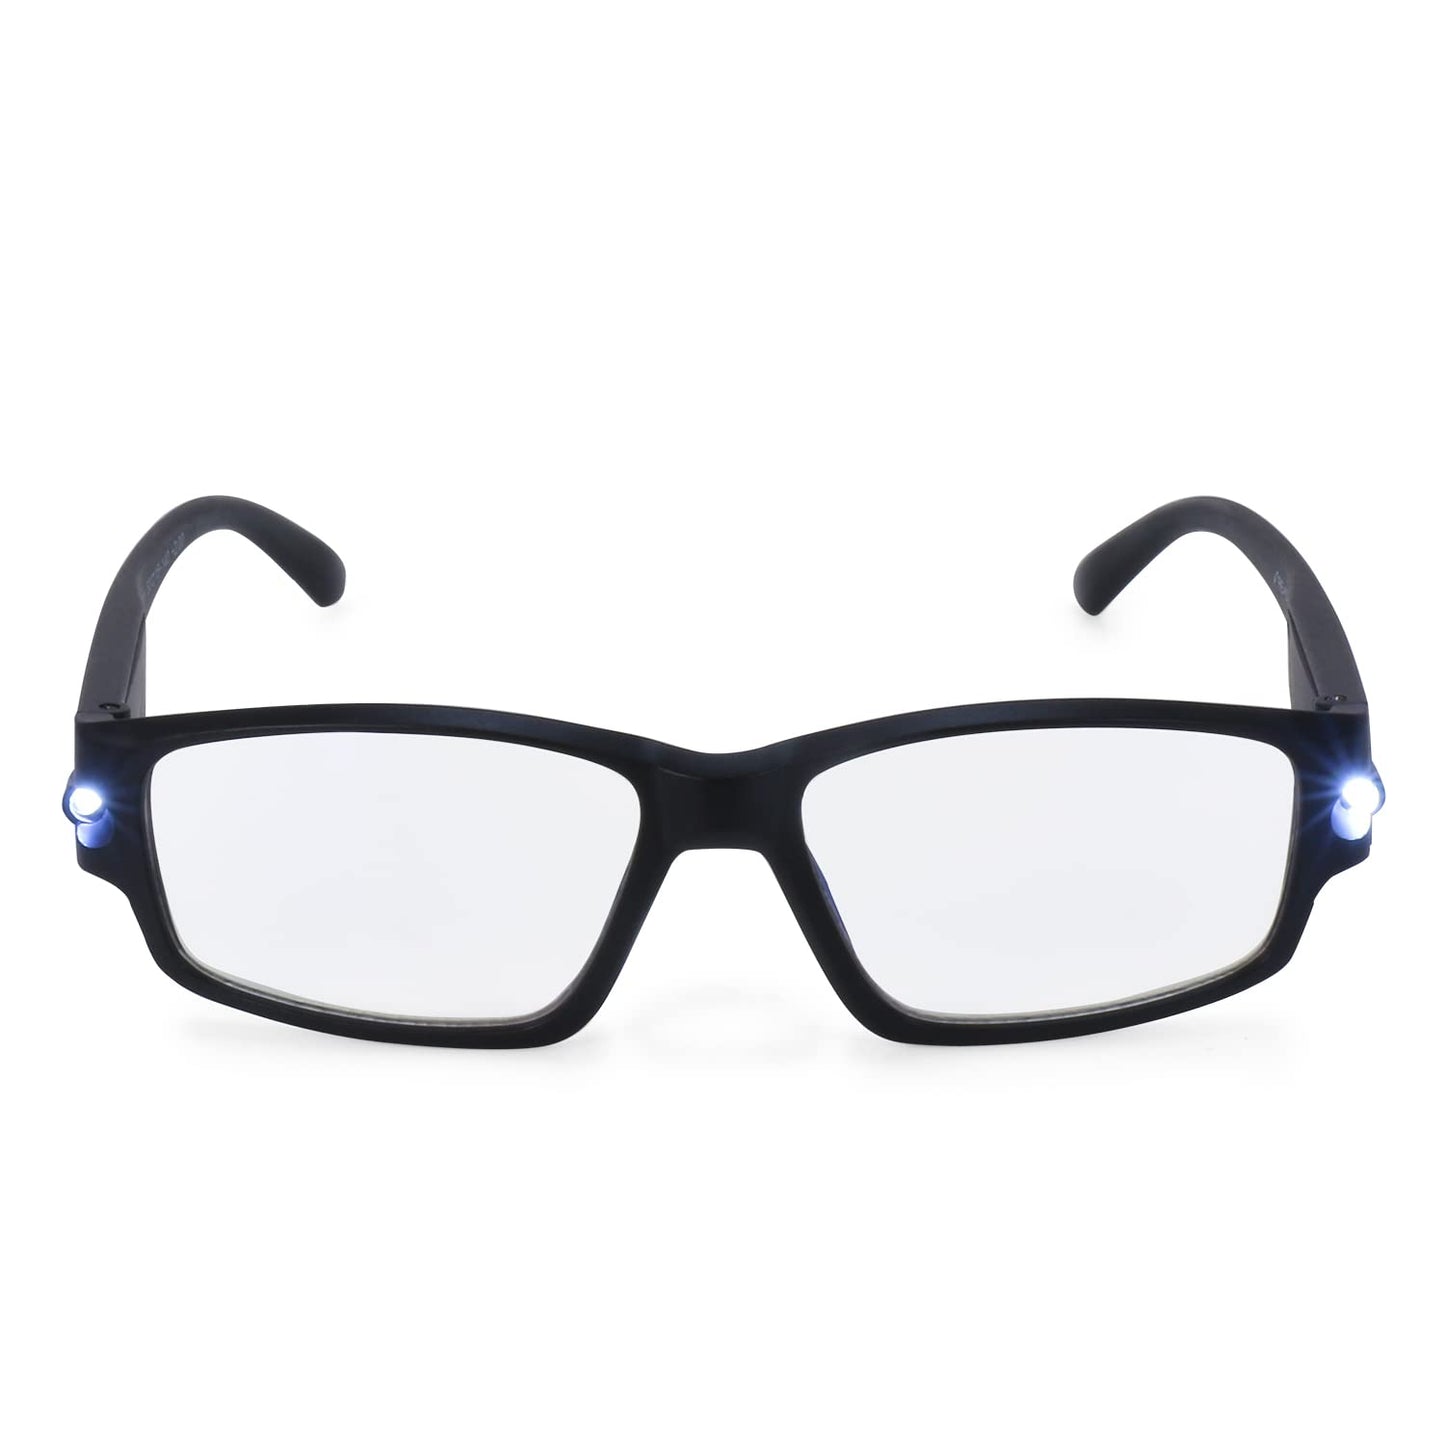 Blue Light Computer Reading Glasses For Men and Women with Led Lights for Night Mode